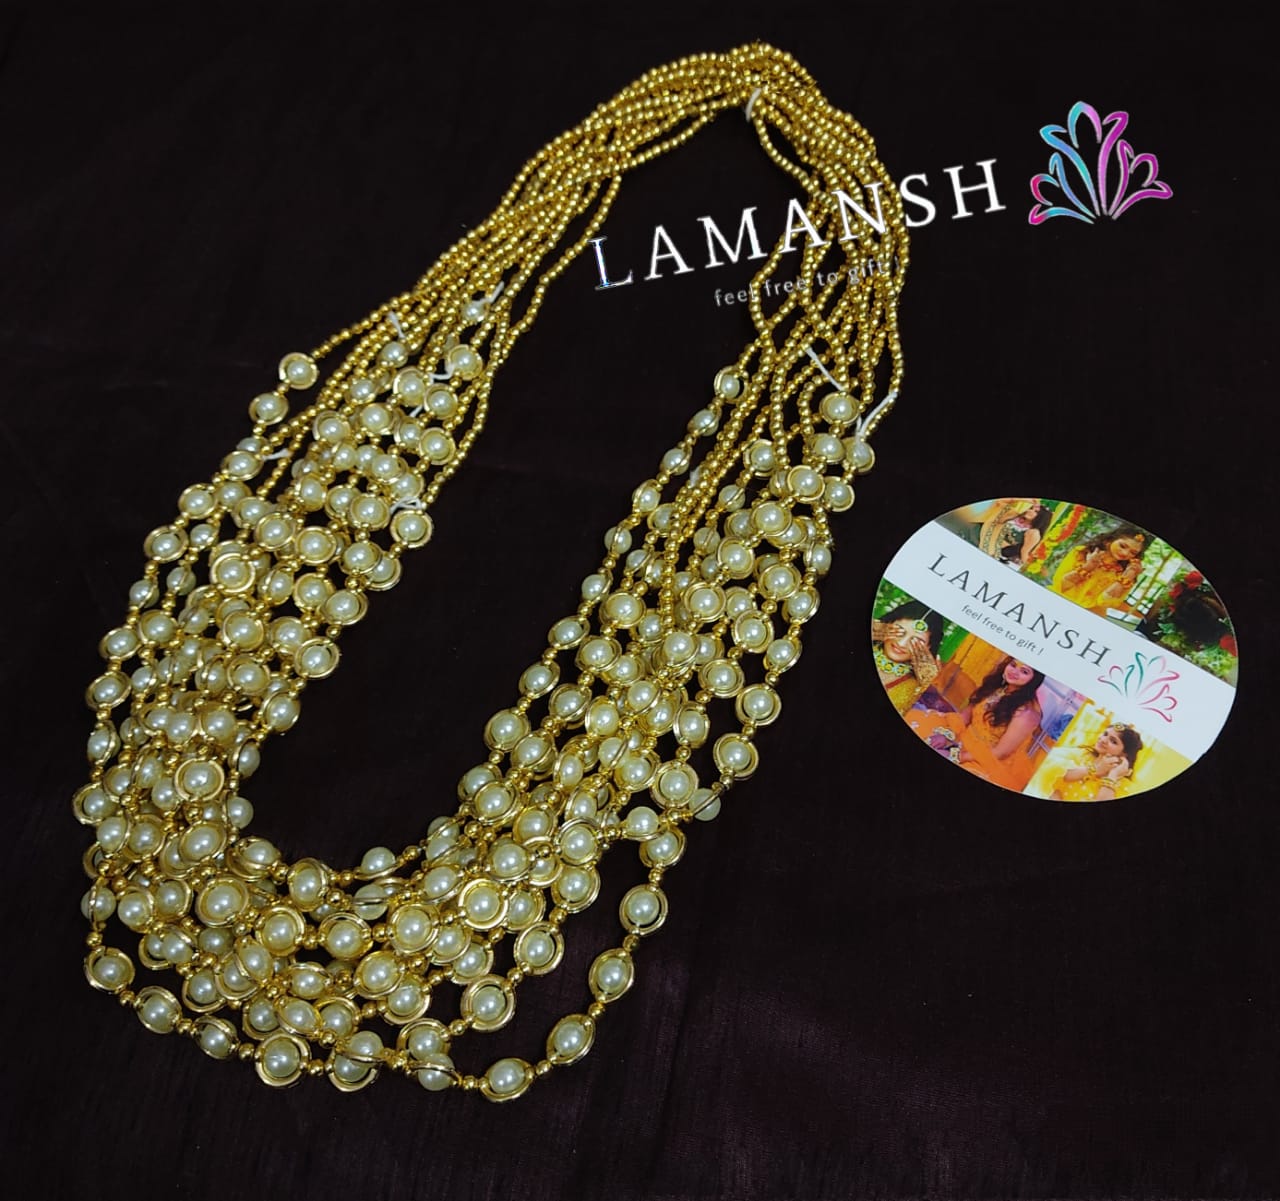 Lamansh Barati Swagat mala White, Gold / Pearl / 25 LAMANSH® Pack of 25 Barati Swagat Moti Mala / Dupatta / Stole  For Weddings, Perfect for Guest Welcome